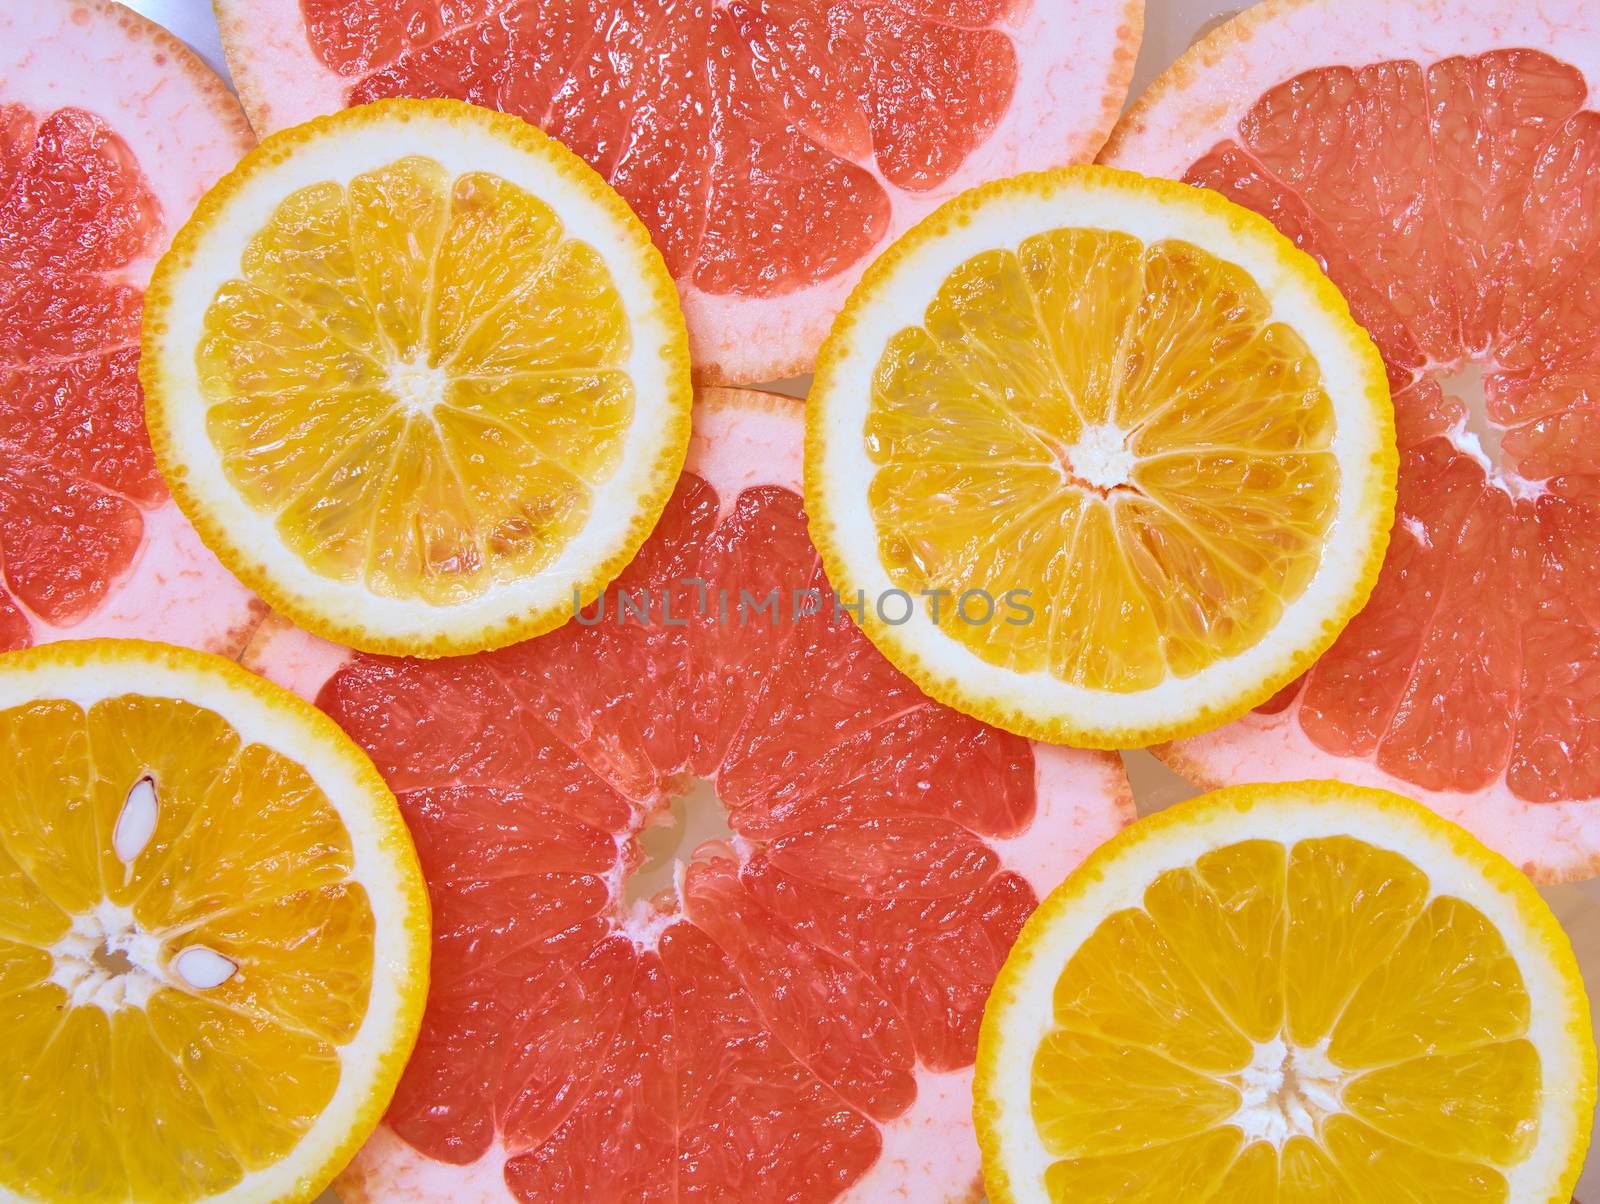 the Orange and grapefruit rings as background